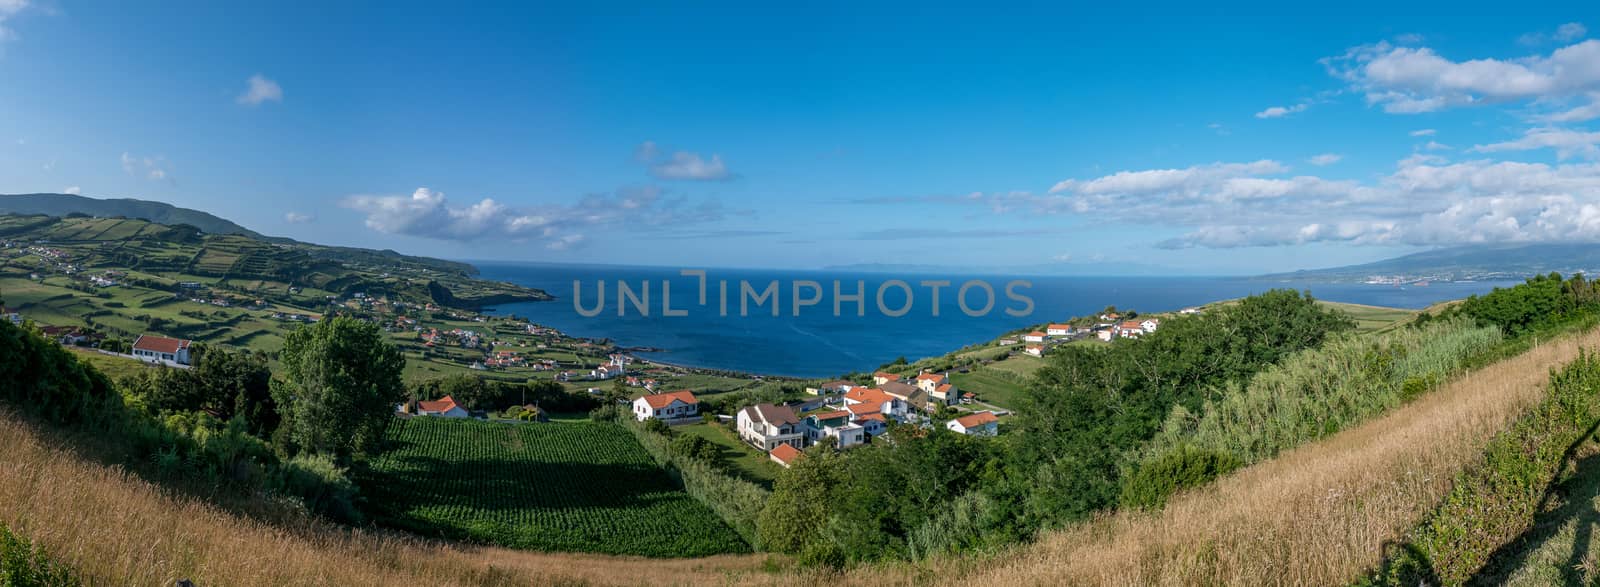 Walk on the Azores archipelago. Discovery of the island of Faial, Azores. Portugal. Europe